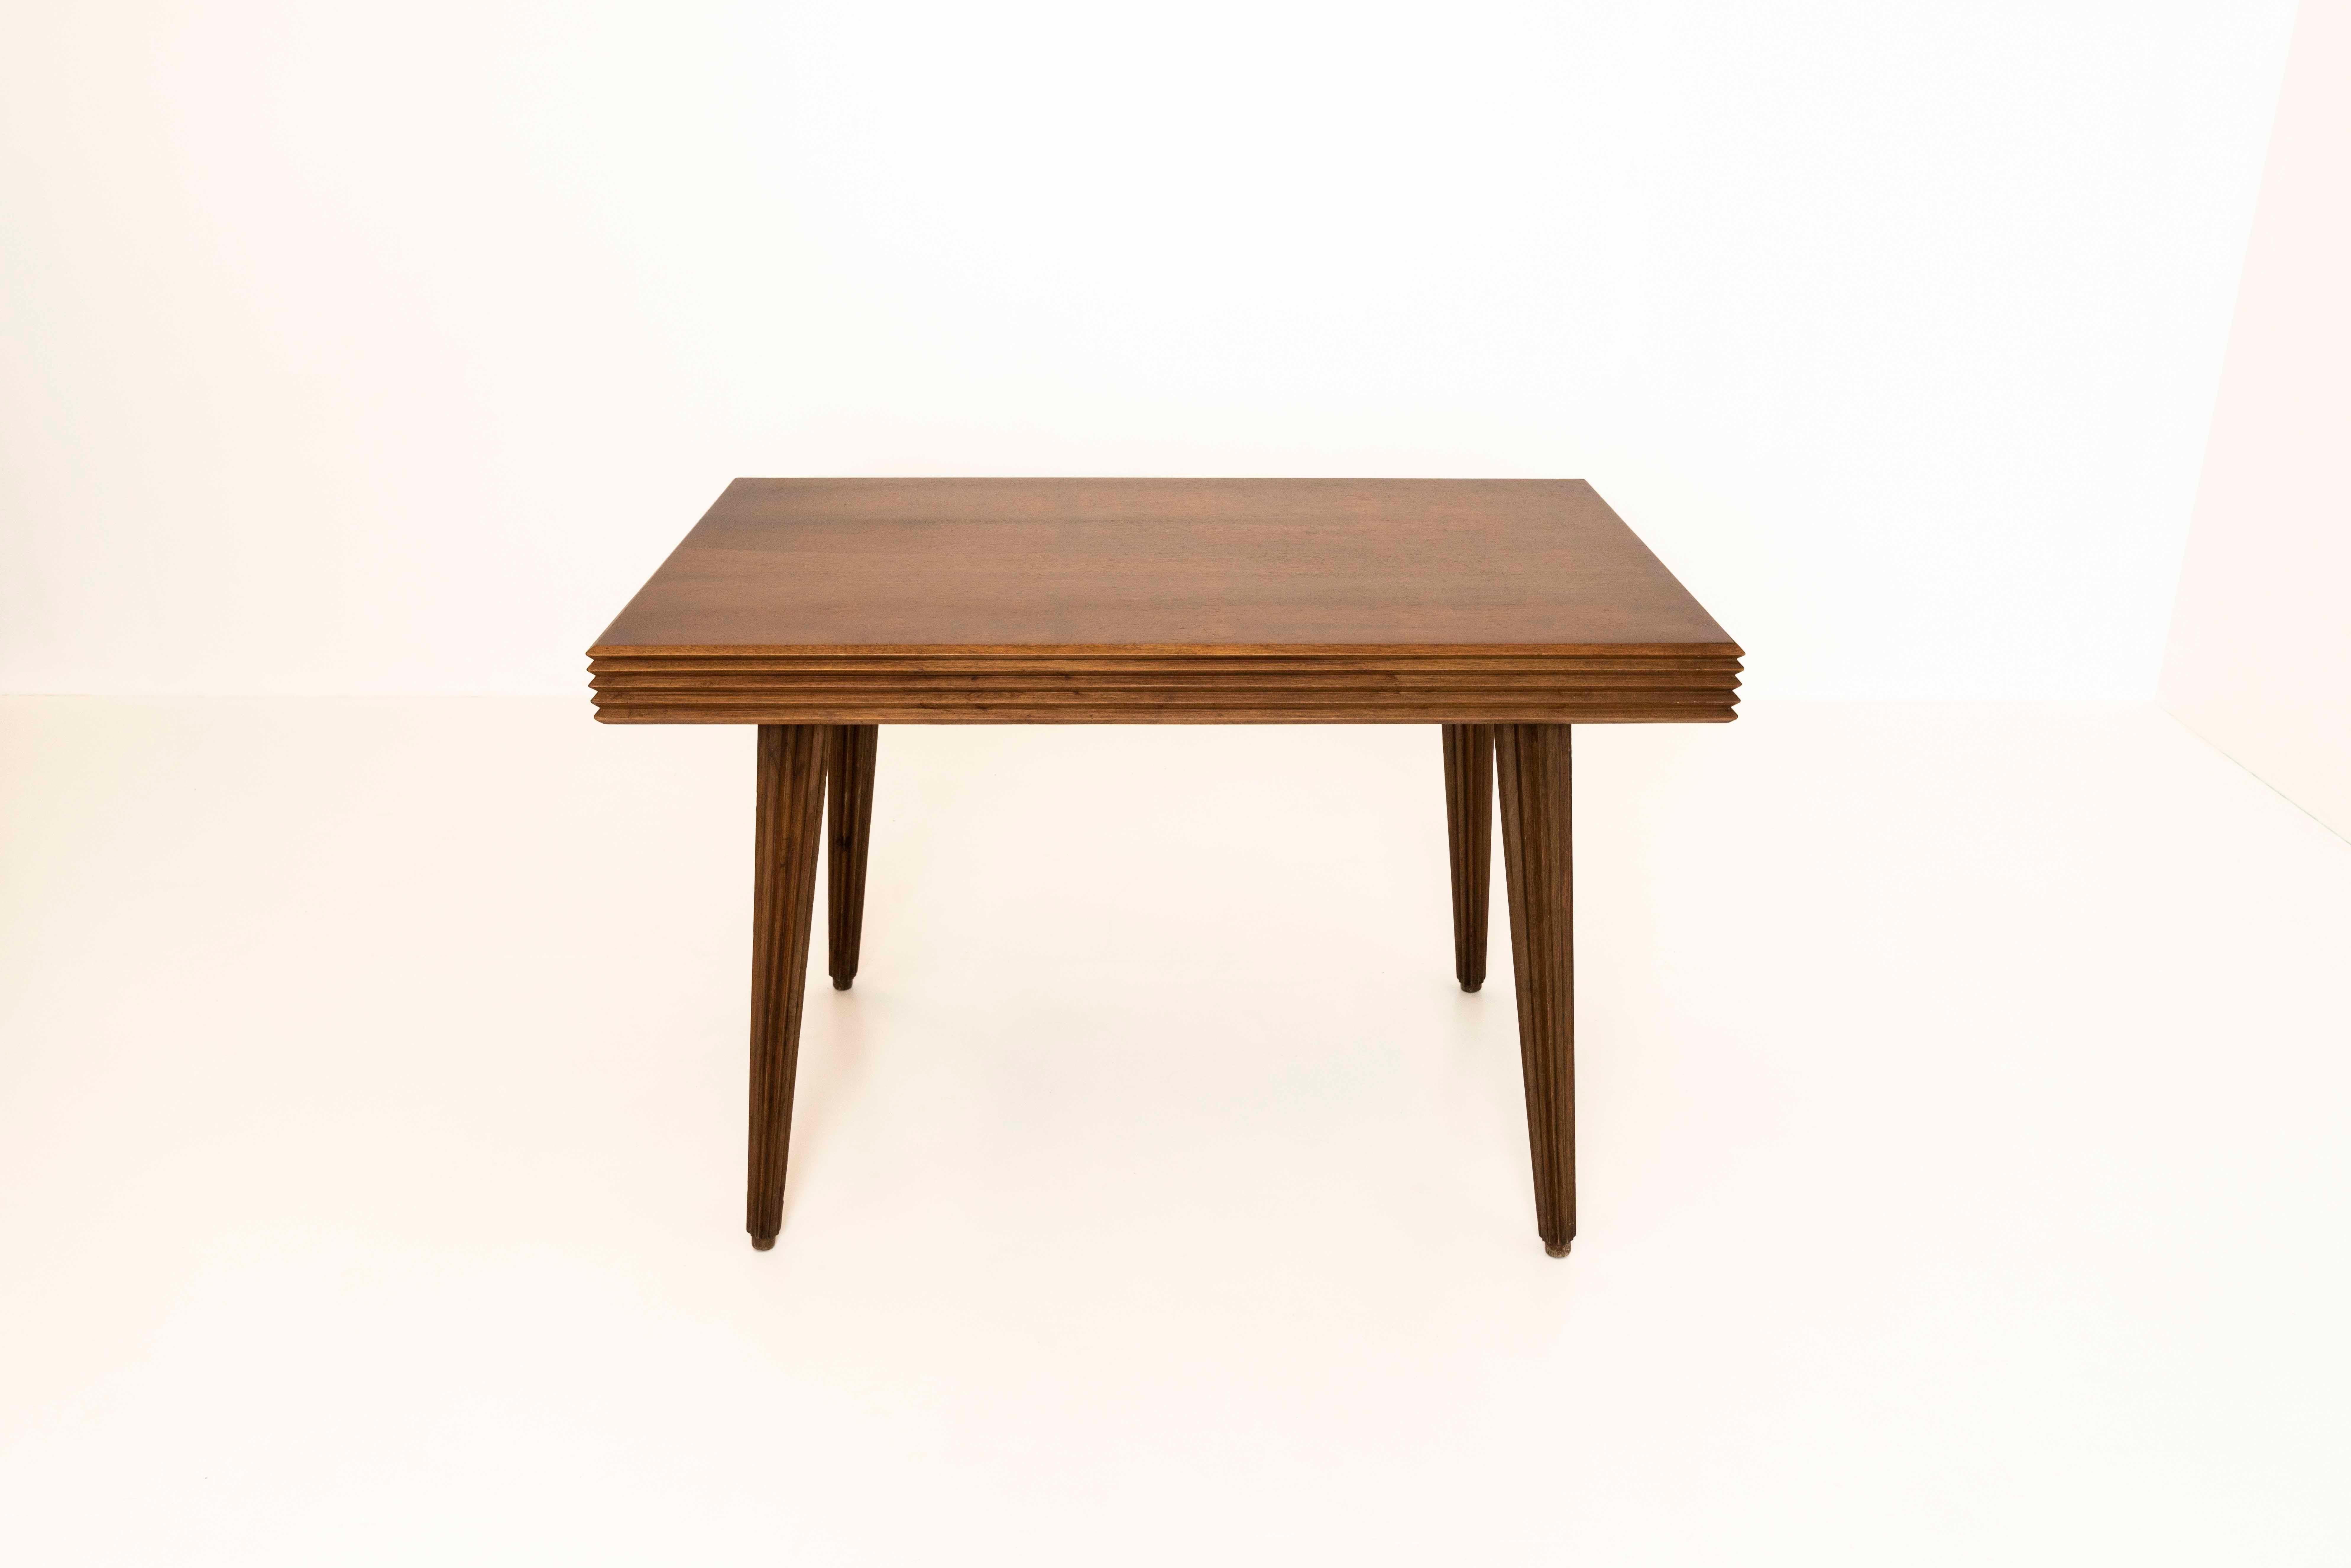 Mid-Century Modern Gio Ponti Dining Table in Veneered Walnut, Italy 1940s For Sale